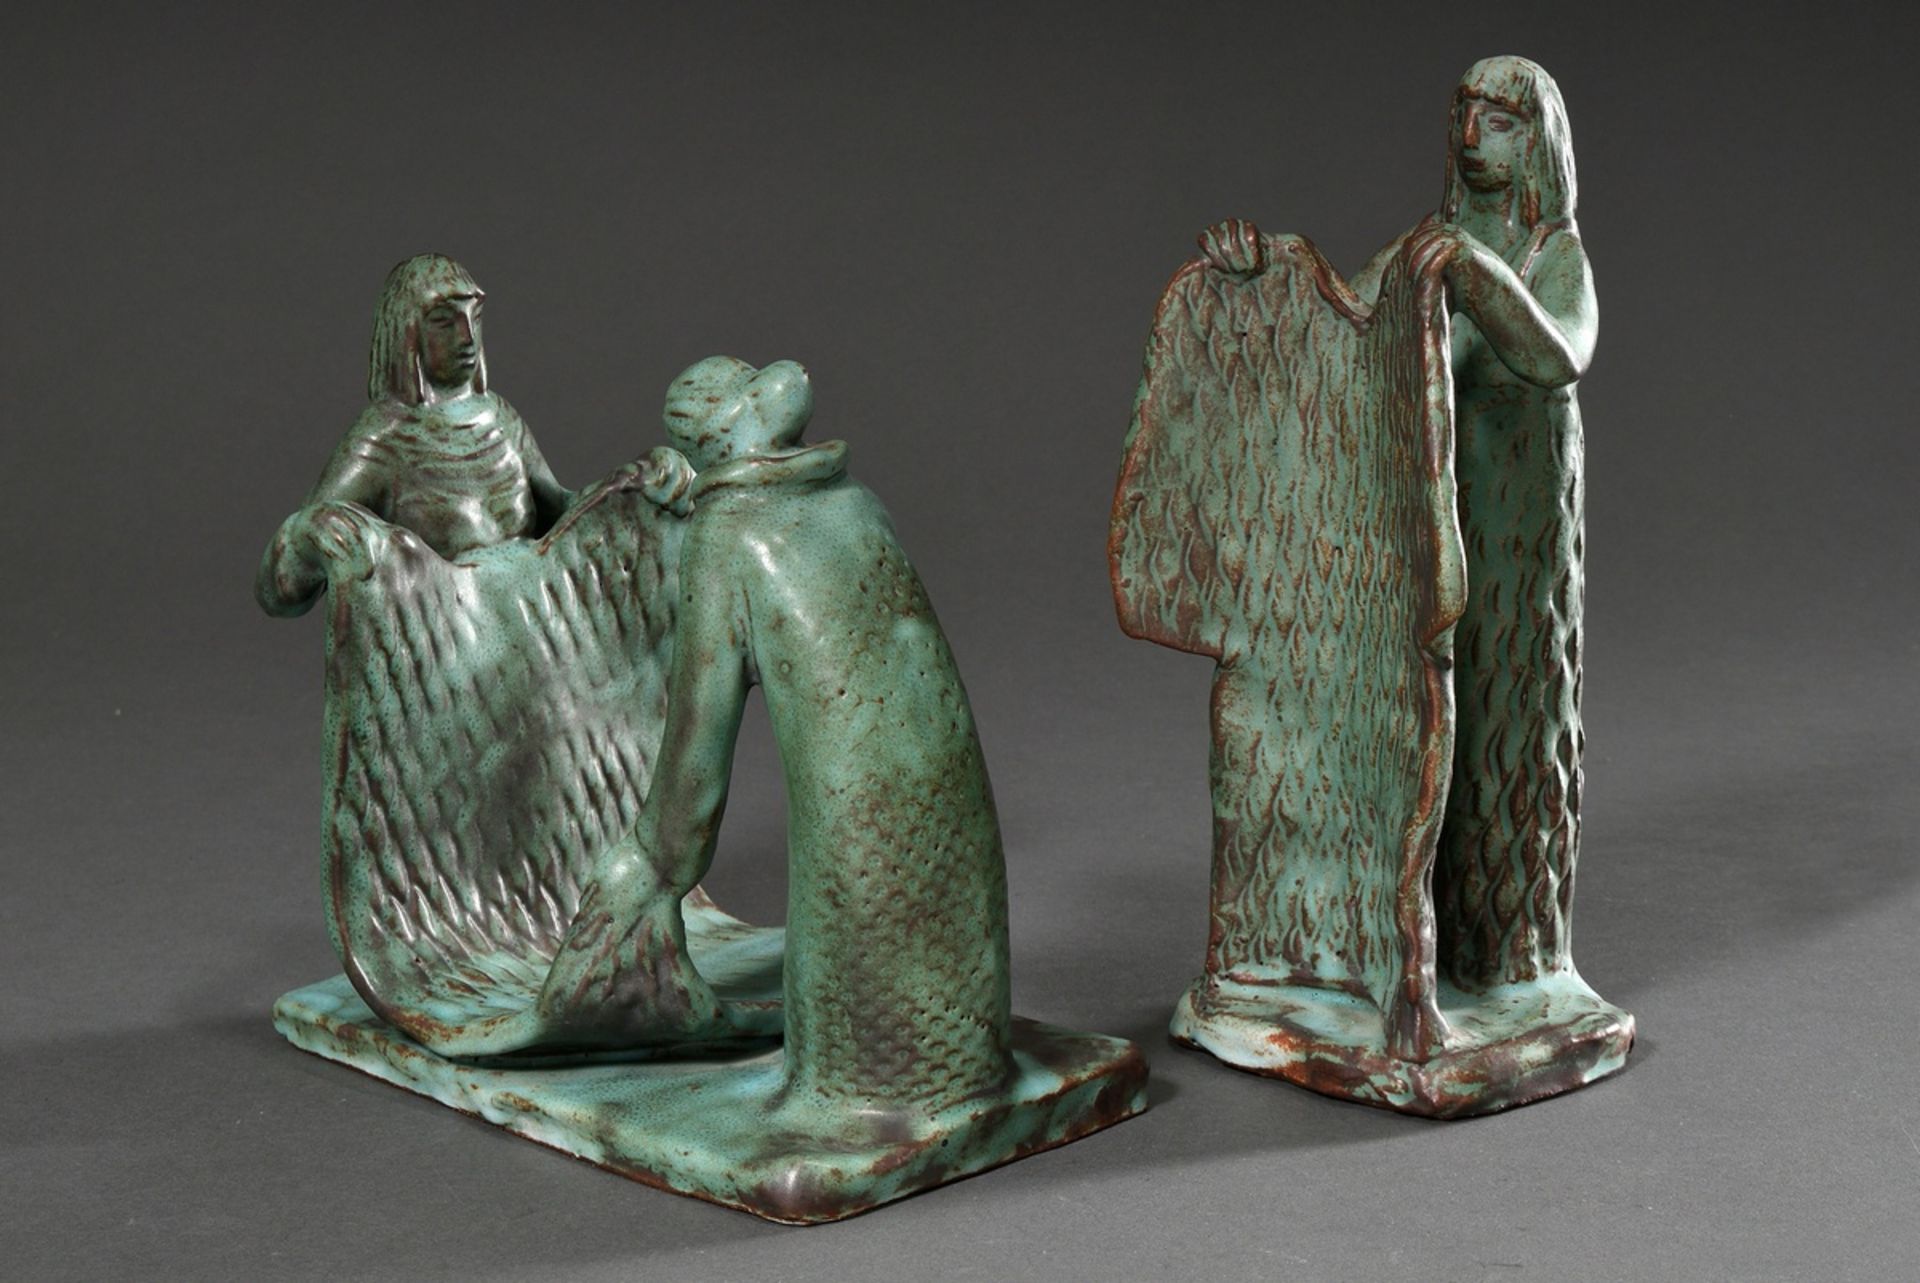 2 Various Maetzel, Monika (1917-2010) figure groups "Woman with robe" and "Two women with blanket",